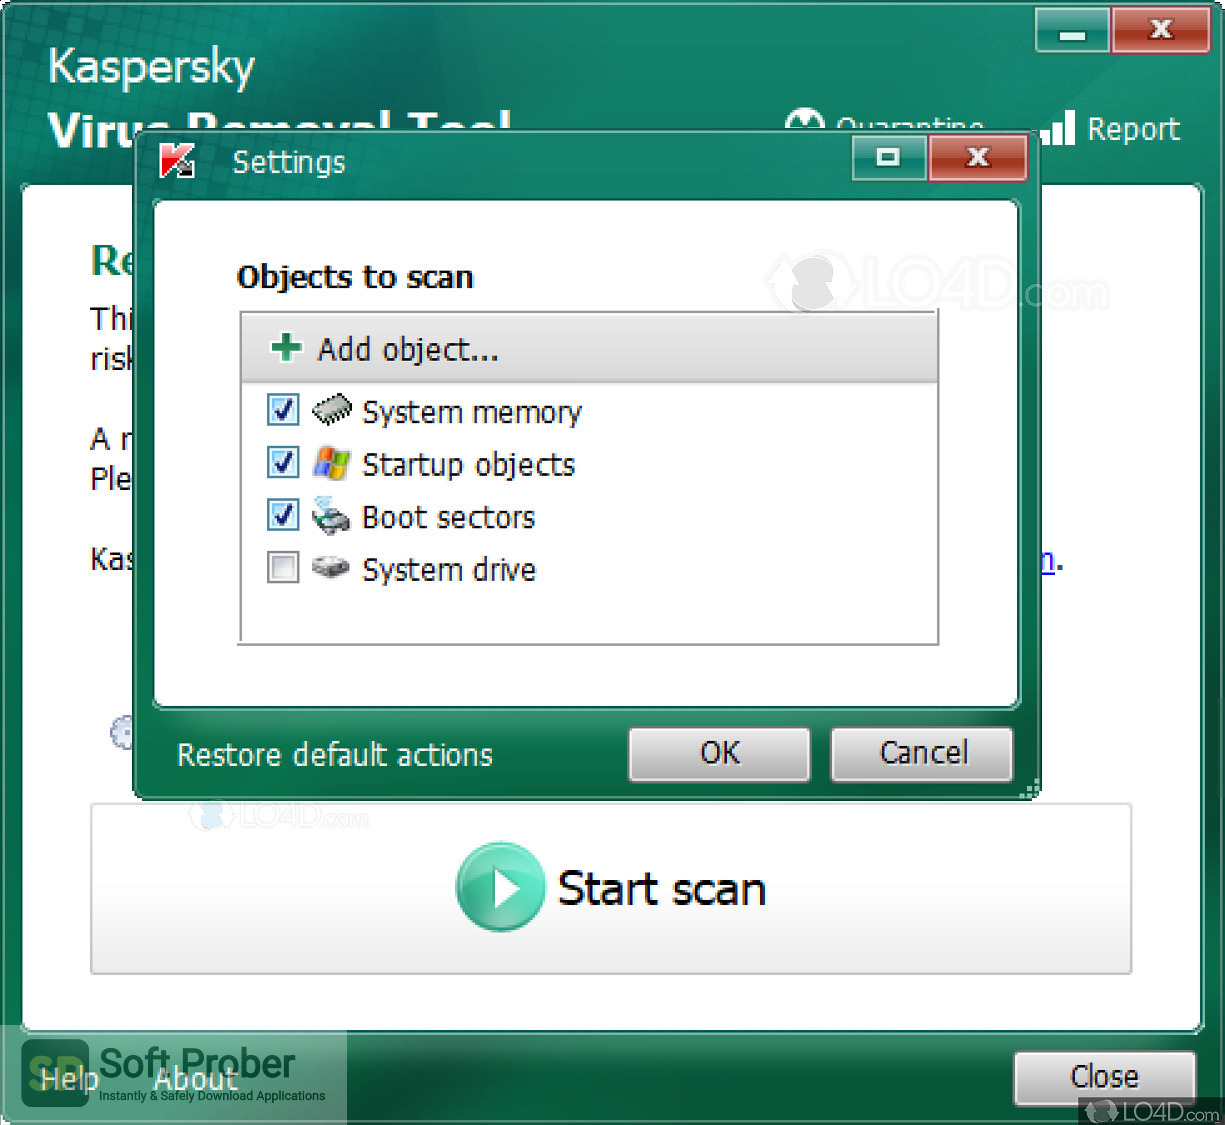 Kaspersky Virus Removal Tool 20.0.10.0 download the new version for ios